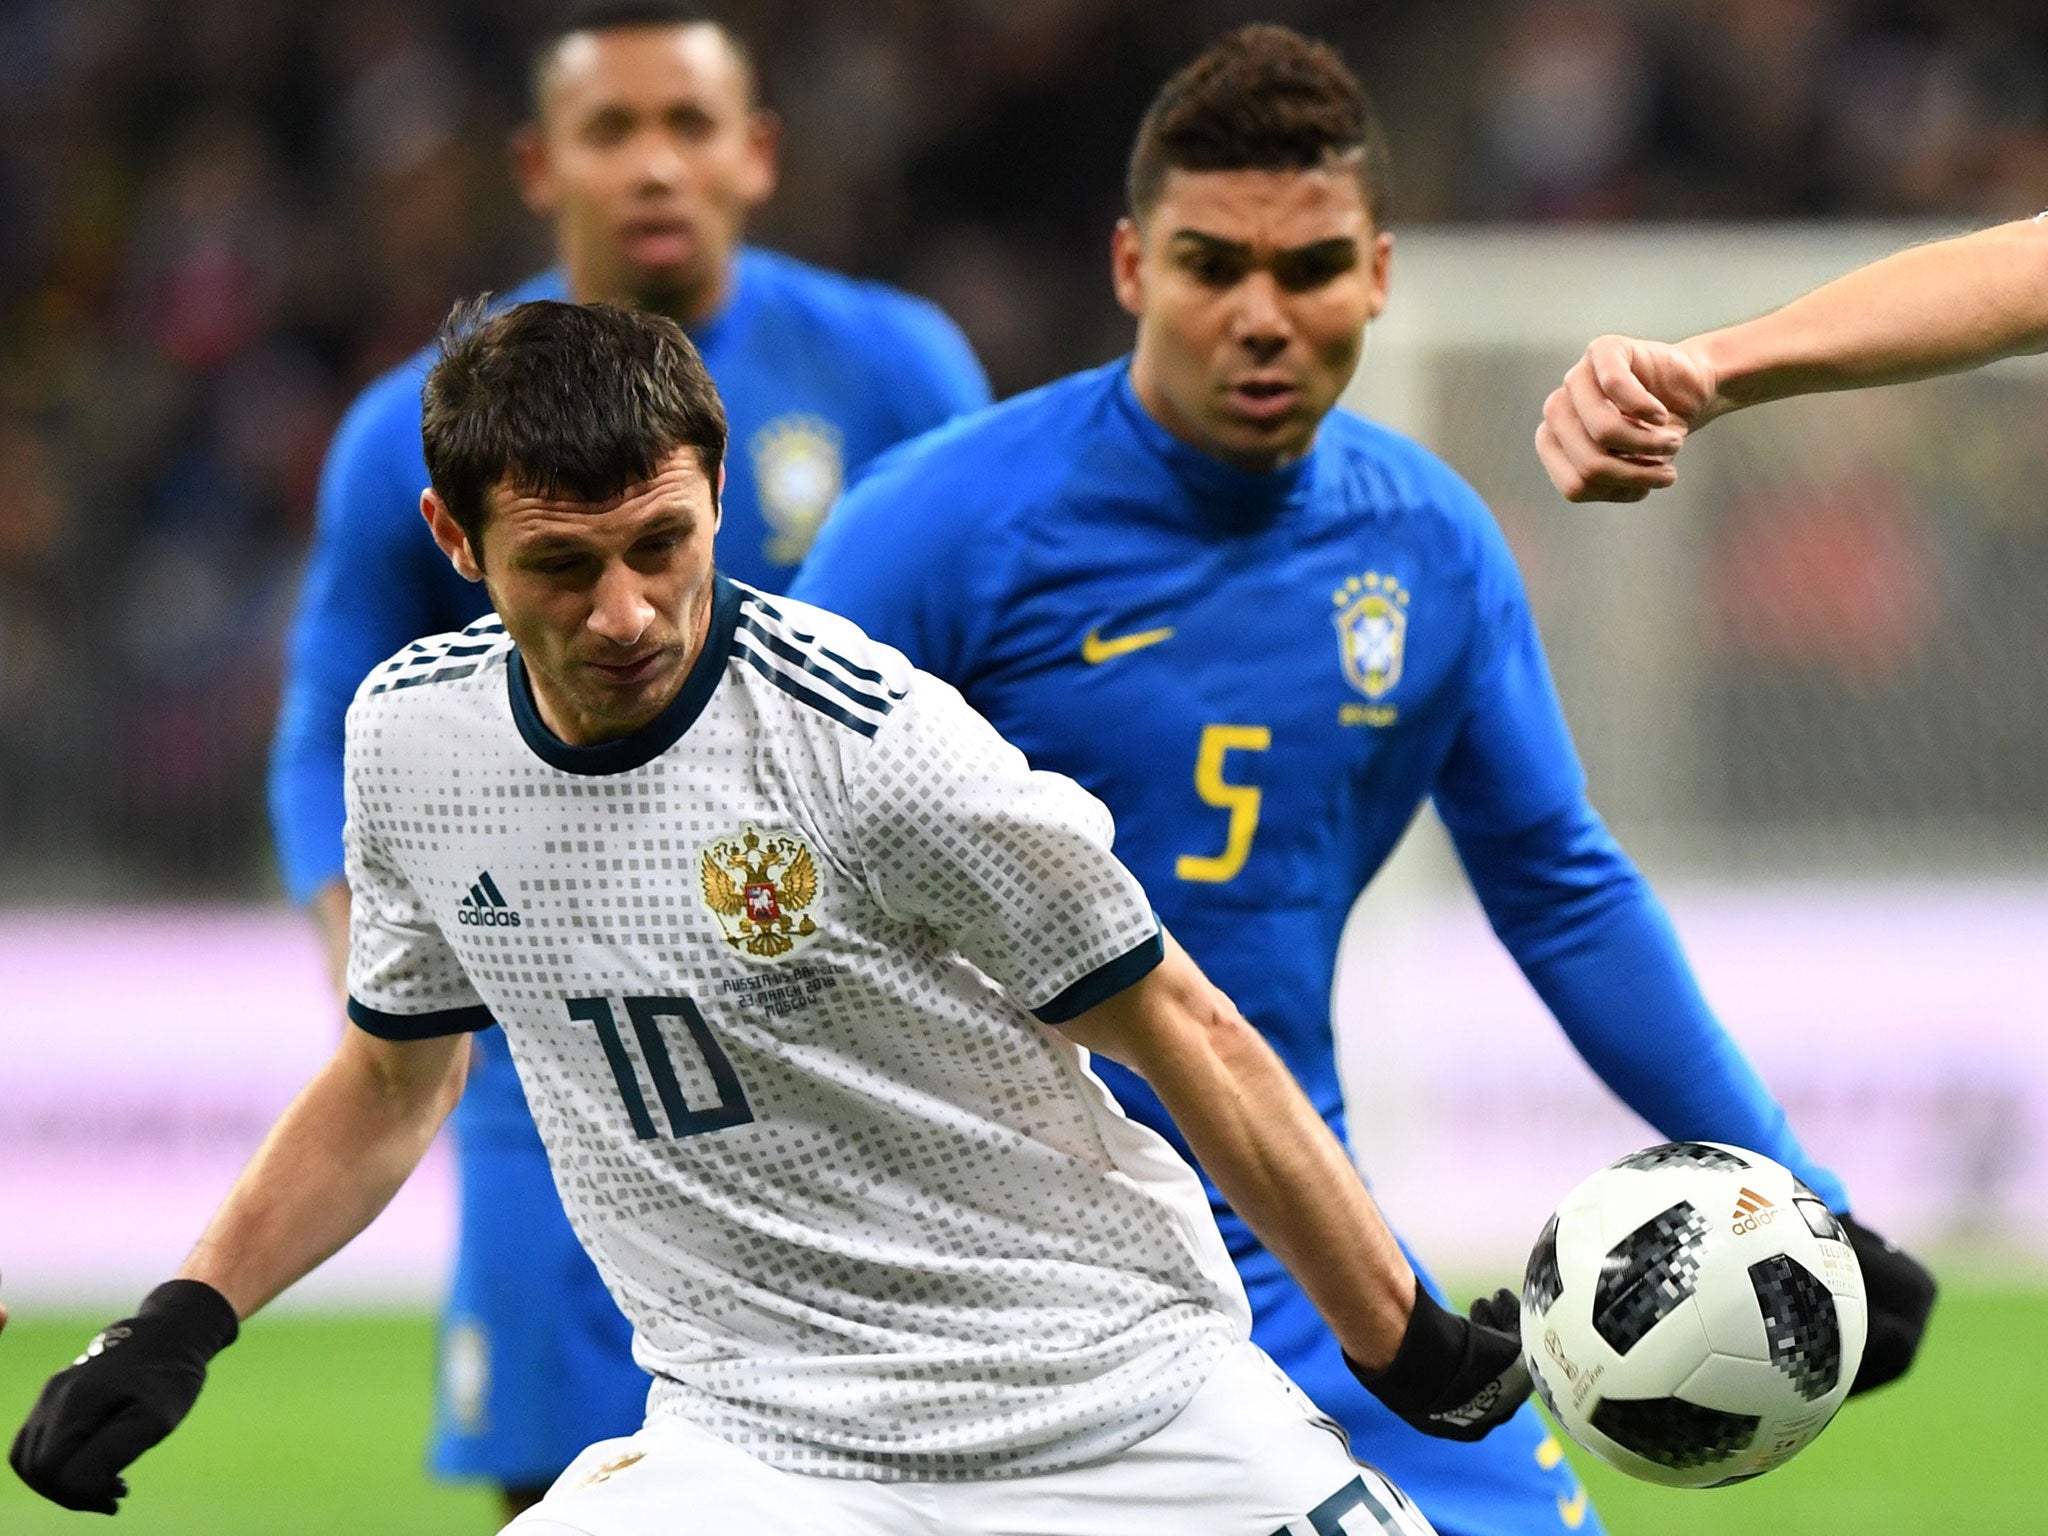 Alan Dzagoev in action for Russia against Brazil